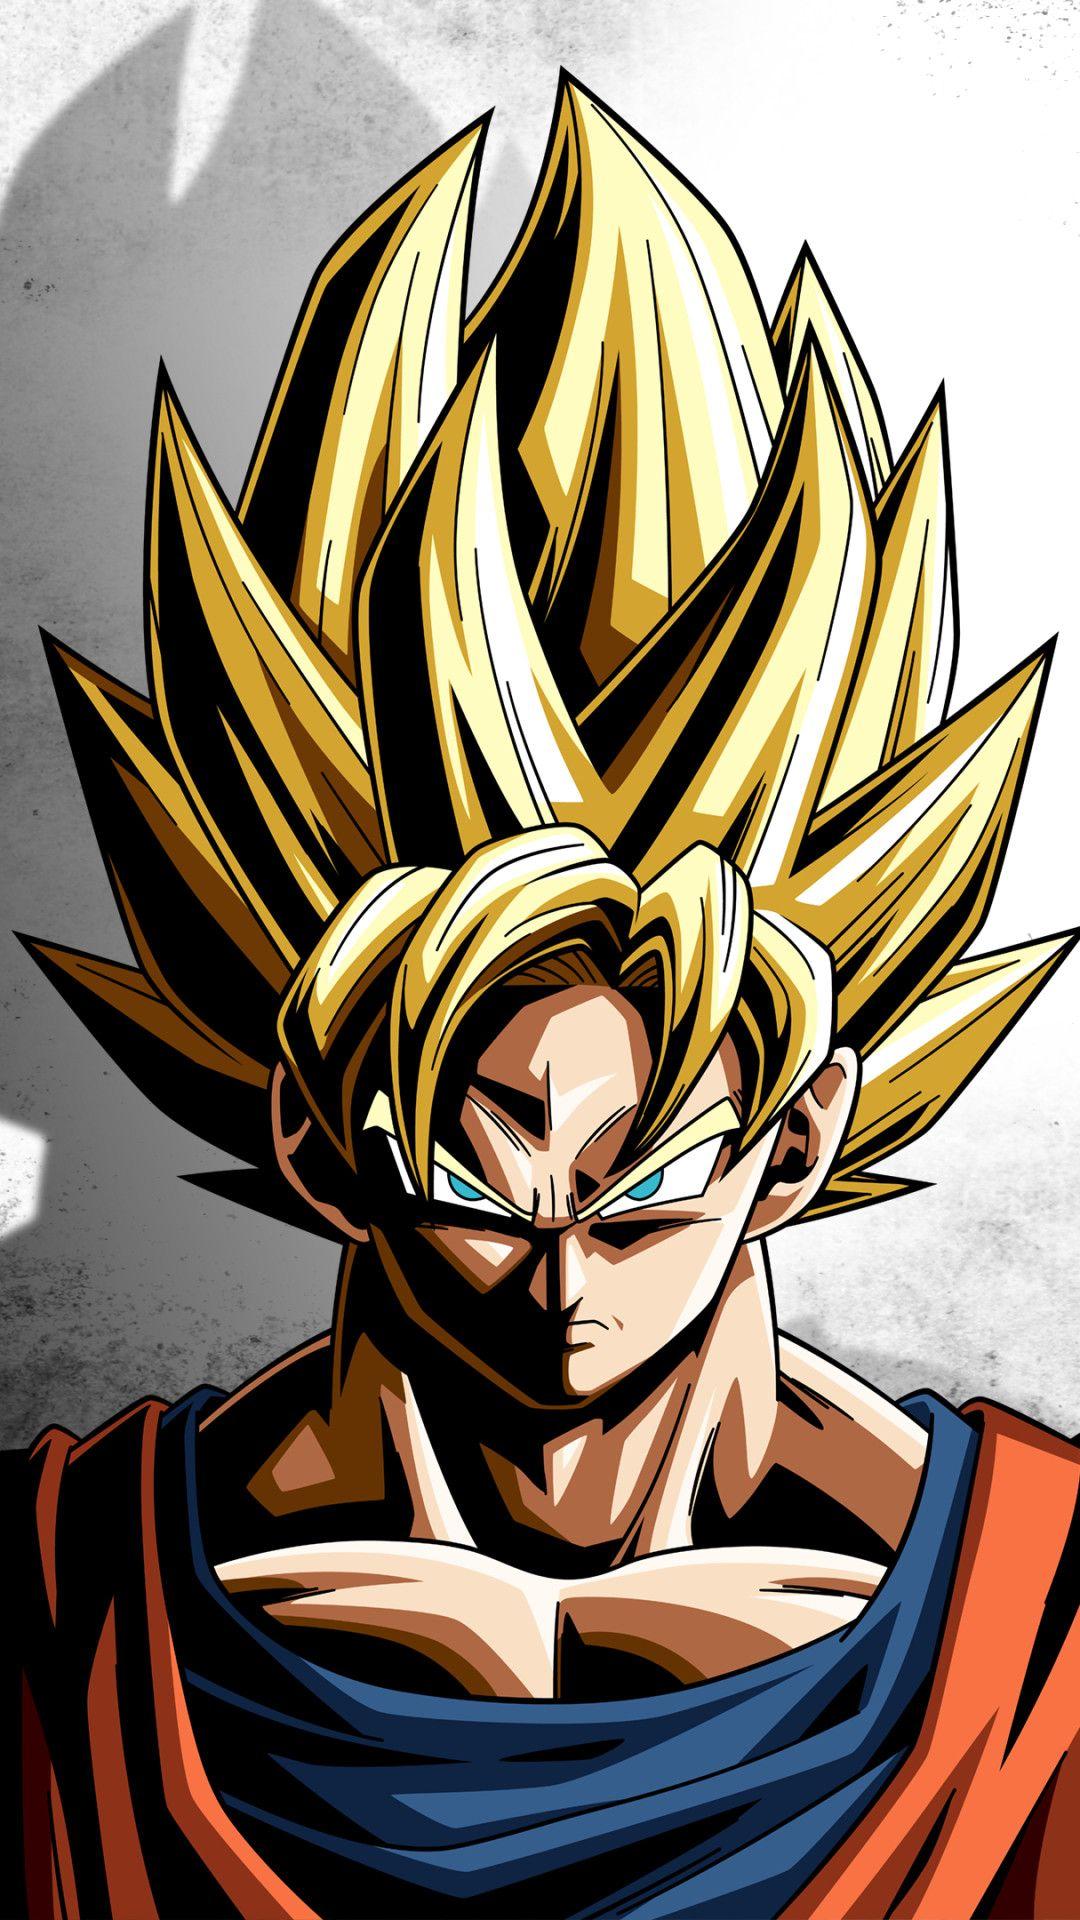 iPhone Wallpapers - Wallpapers for iPhone 8, iPhone X and iPhone 7  Dragon  ball super wallpapers, Dragon ball wallpapers, Dragon ball wallpaper iphone